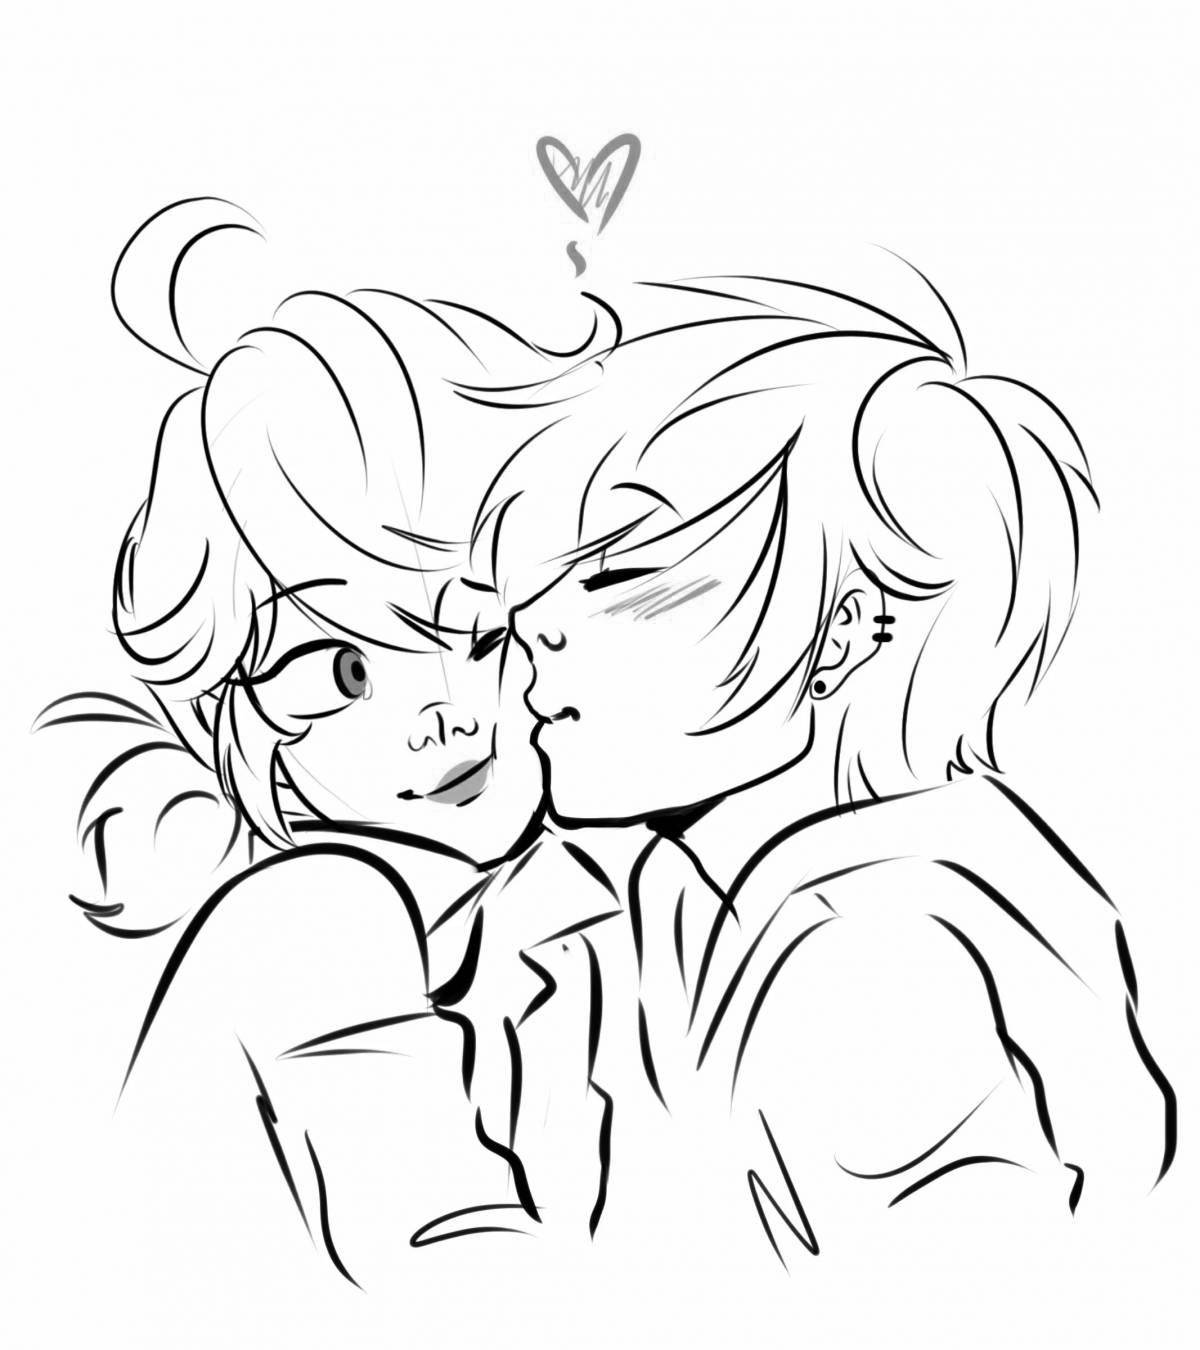 Charming marinette and adrian coloring page